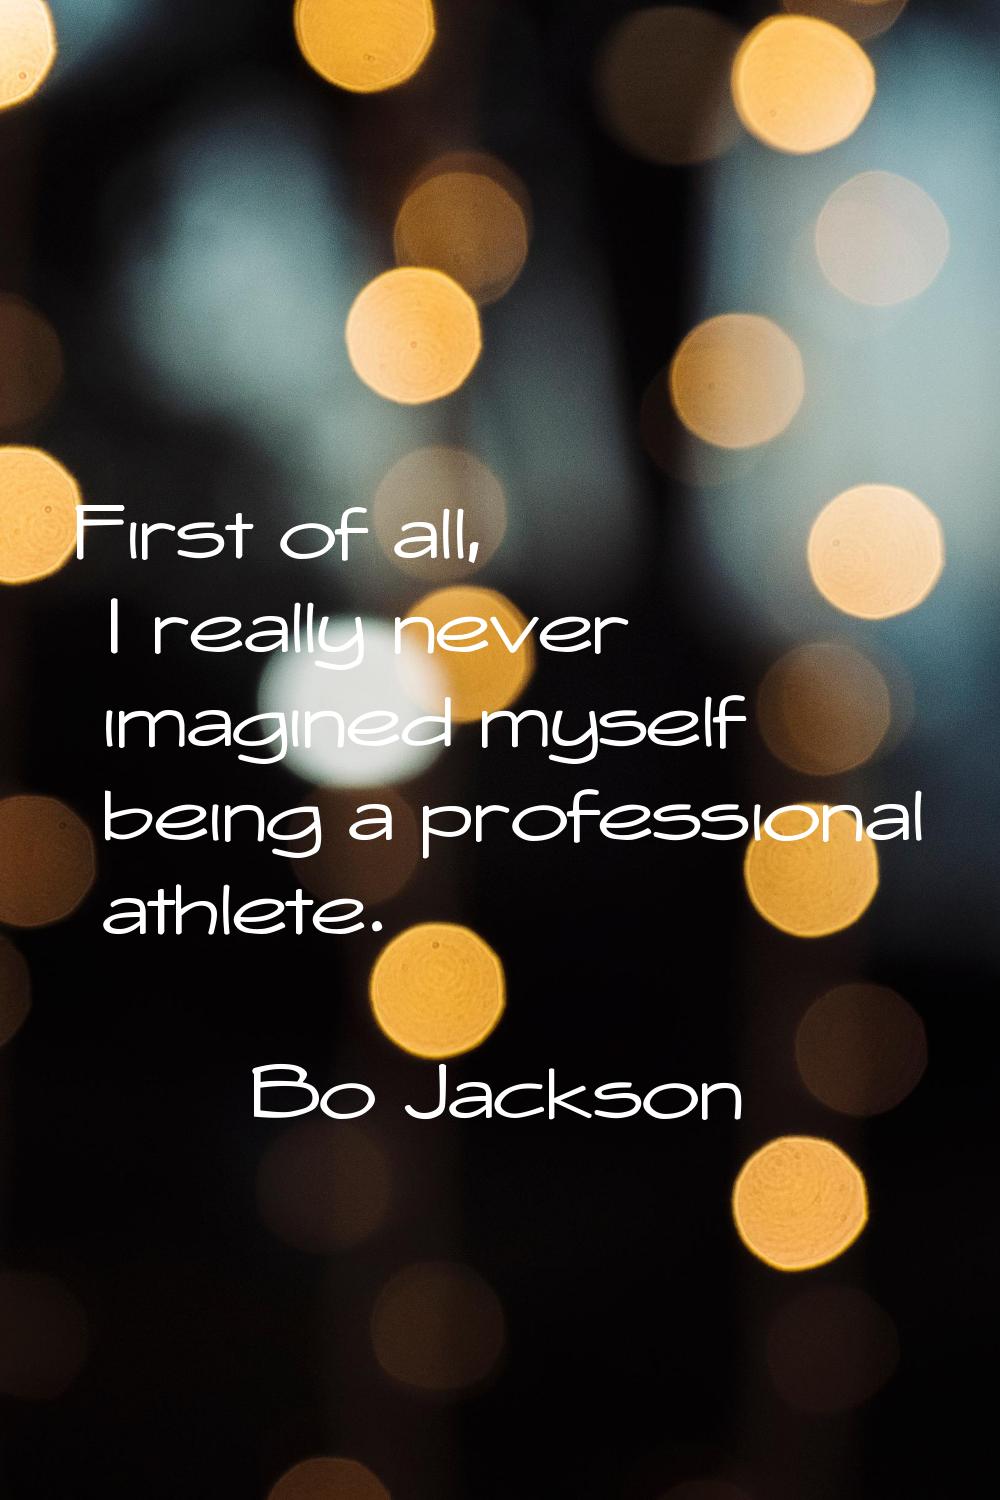 First of all, I really never imagined myself being a professional athlete.